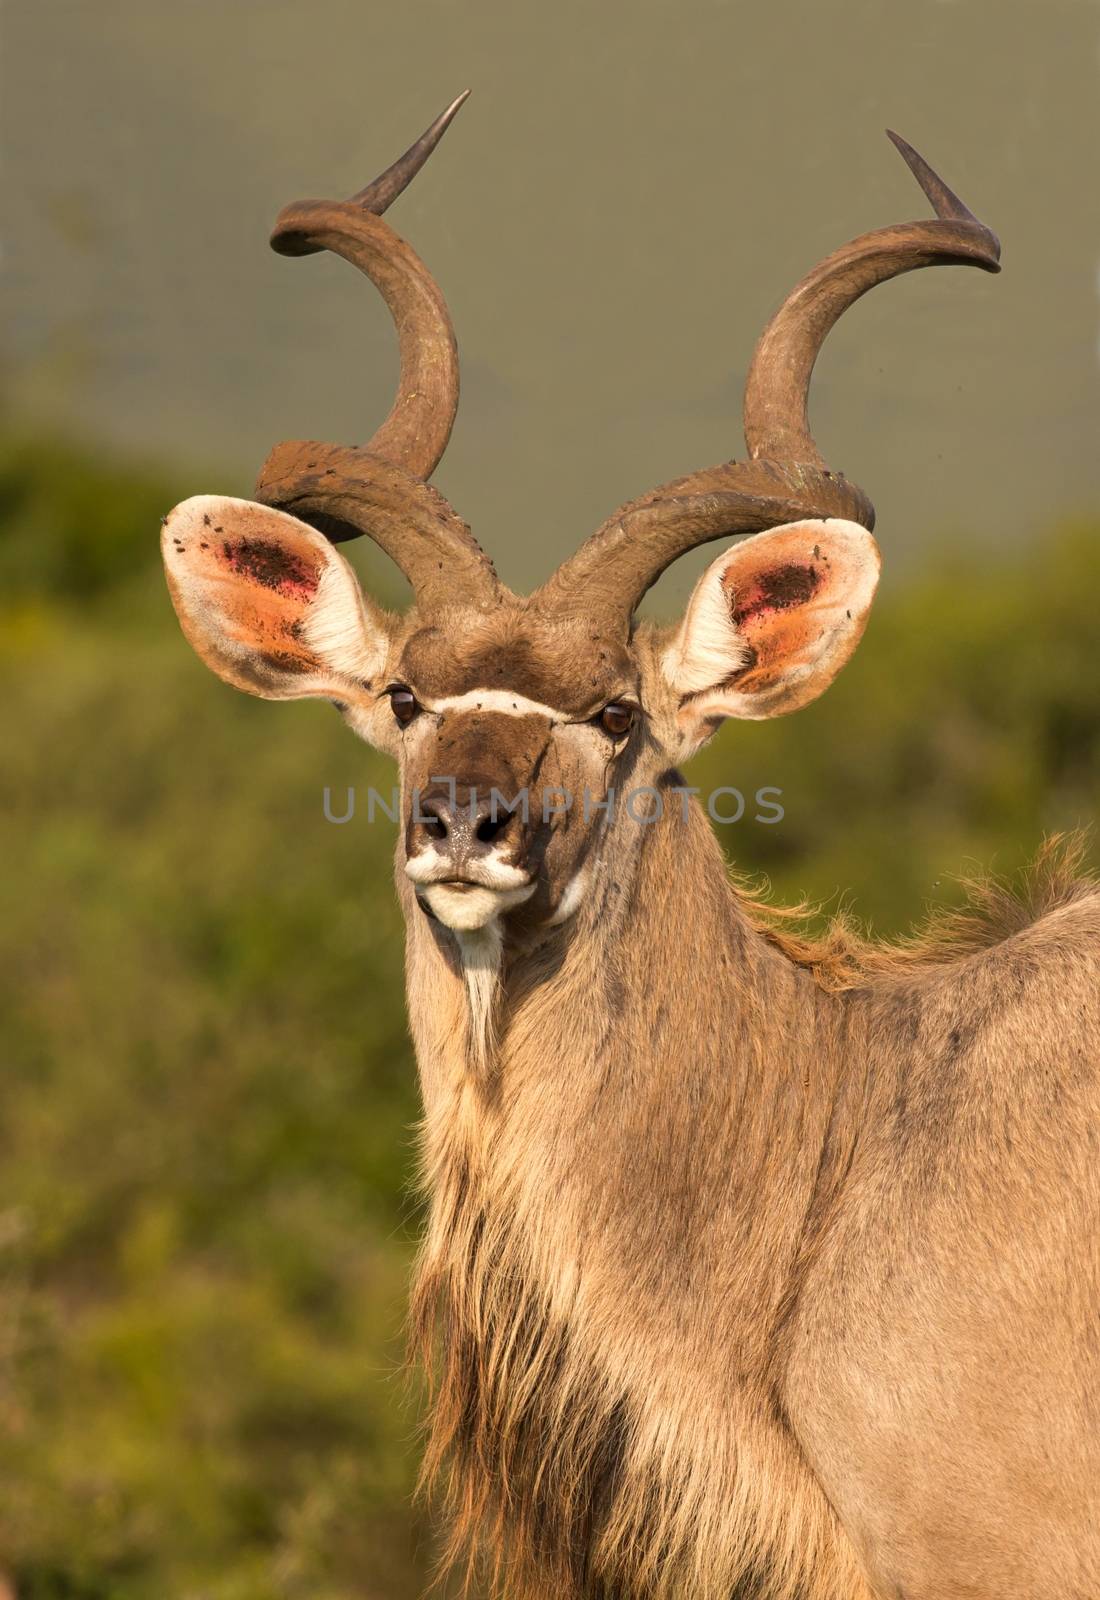 Handsome male kudu antelope with large spiralled horns